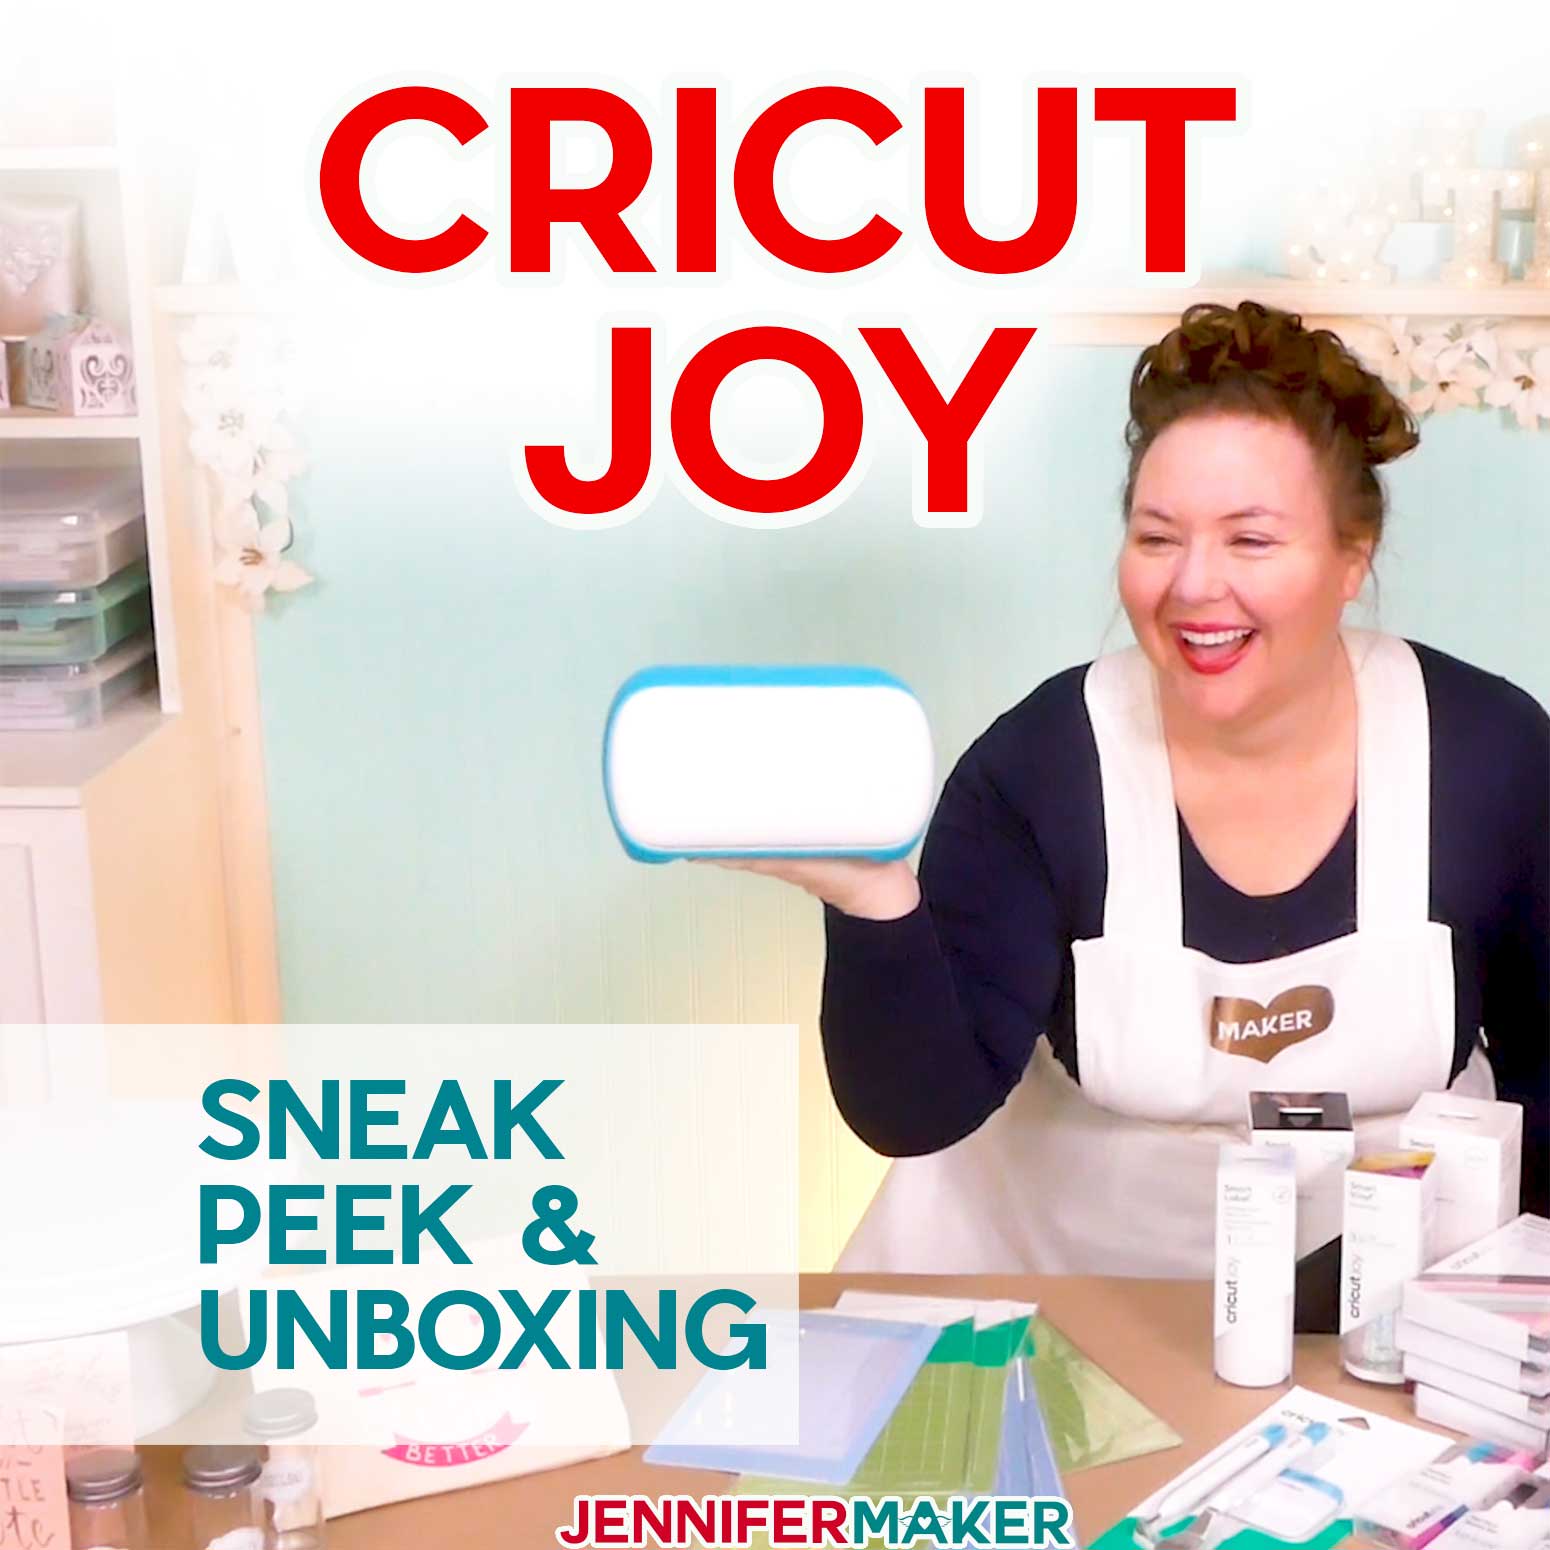 Cricut Joy Ultimate Guide to New Compact Smart Cutting Machine with answers to all of your questions + tutorials!